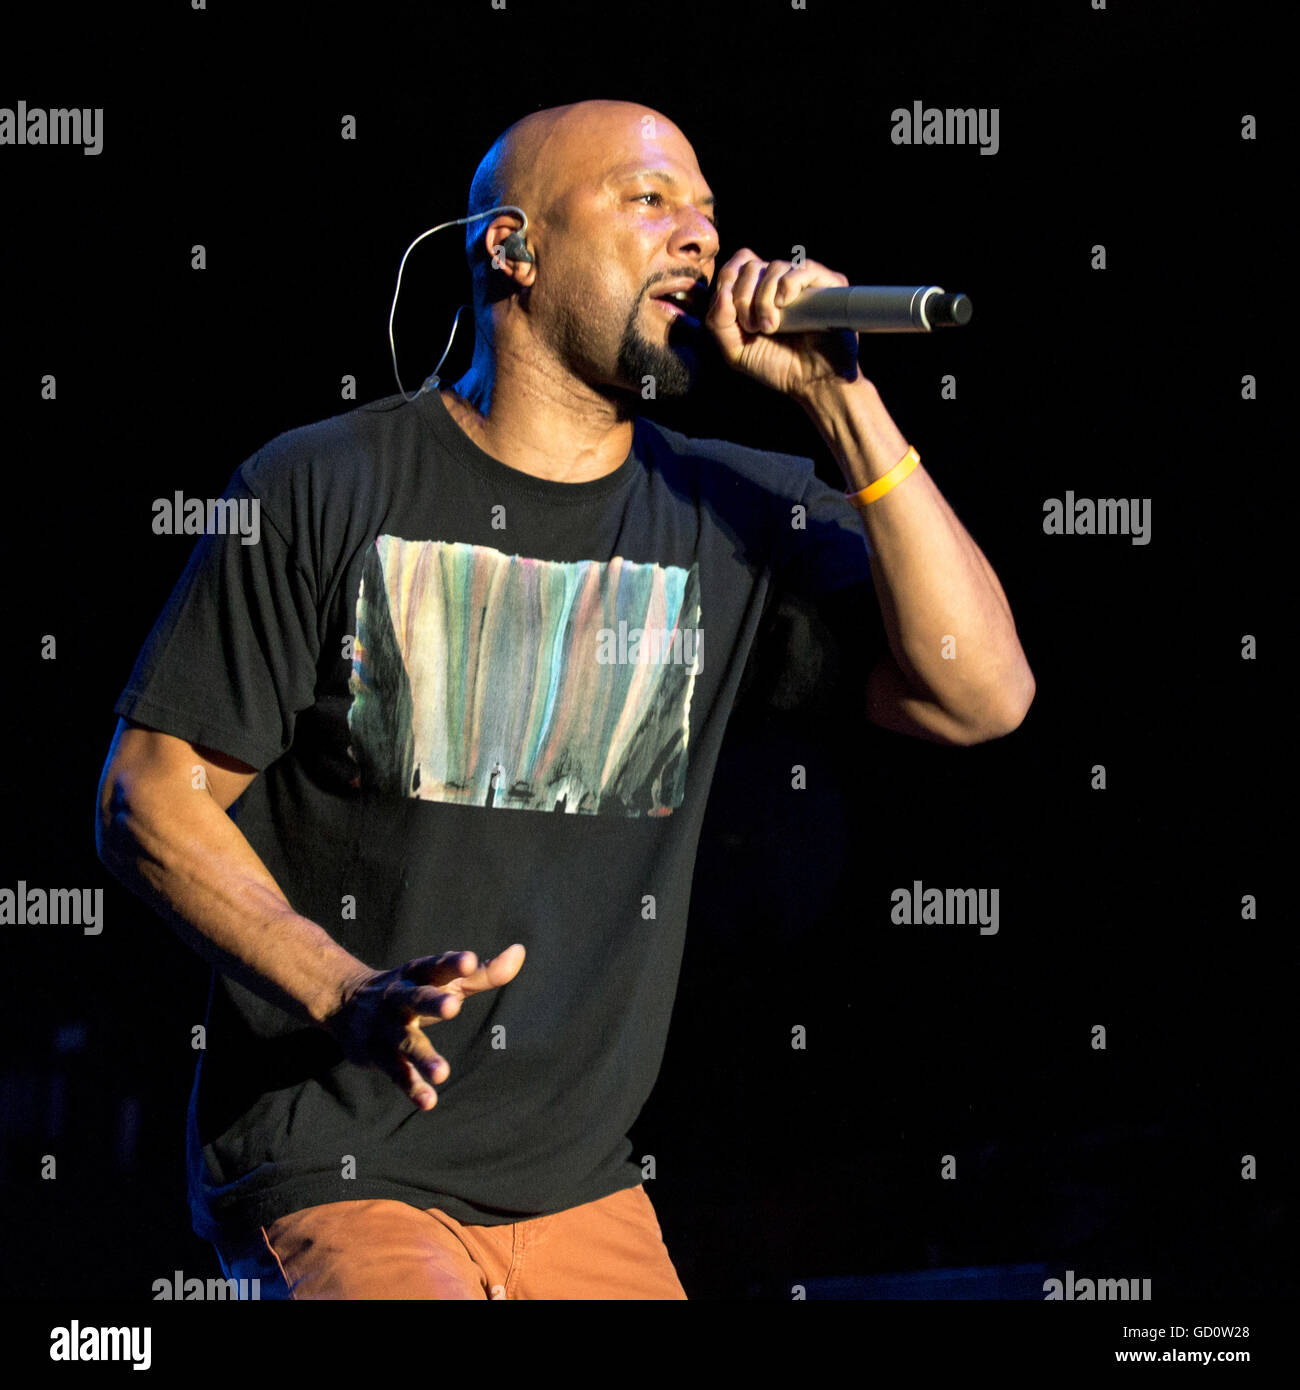 Milwaukee, Wisconsin, USA. 8th July, 2016. Rapper COMMON (aka LONNIE RASHID LYNN, JR.)performs live at Henry Maier Festival Park during Summerfest in Milwaukee, Wisconsin © Daniel DeSlover/ZUMA Wire/Alamy Live News Stock Photo